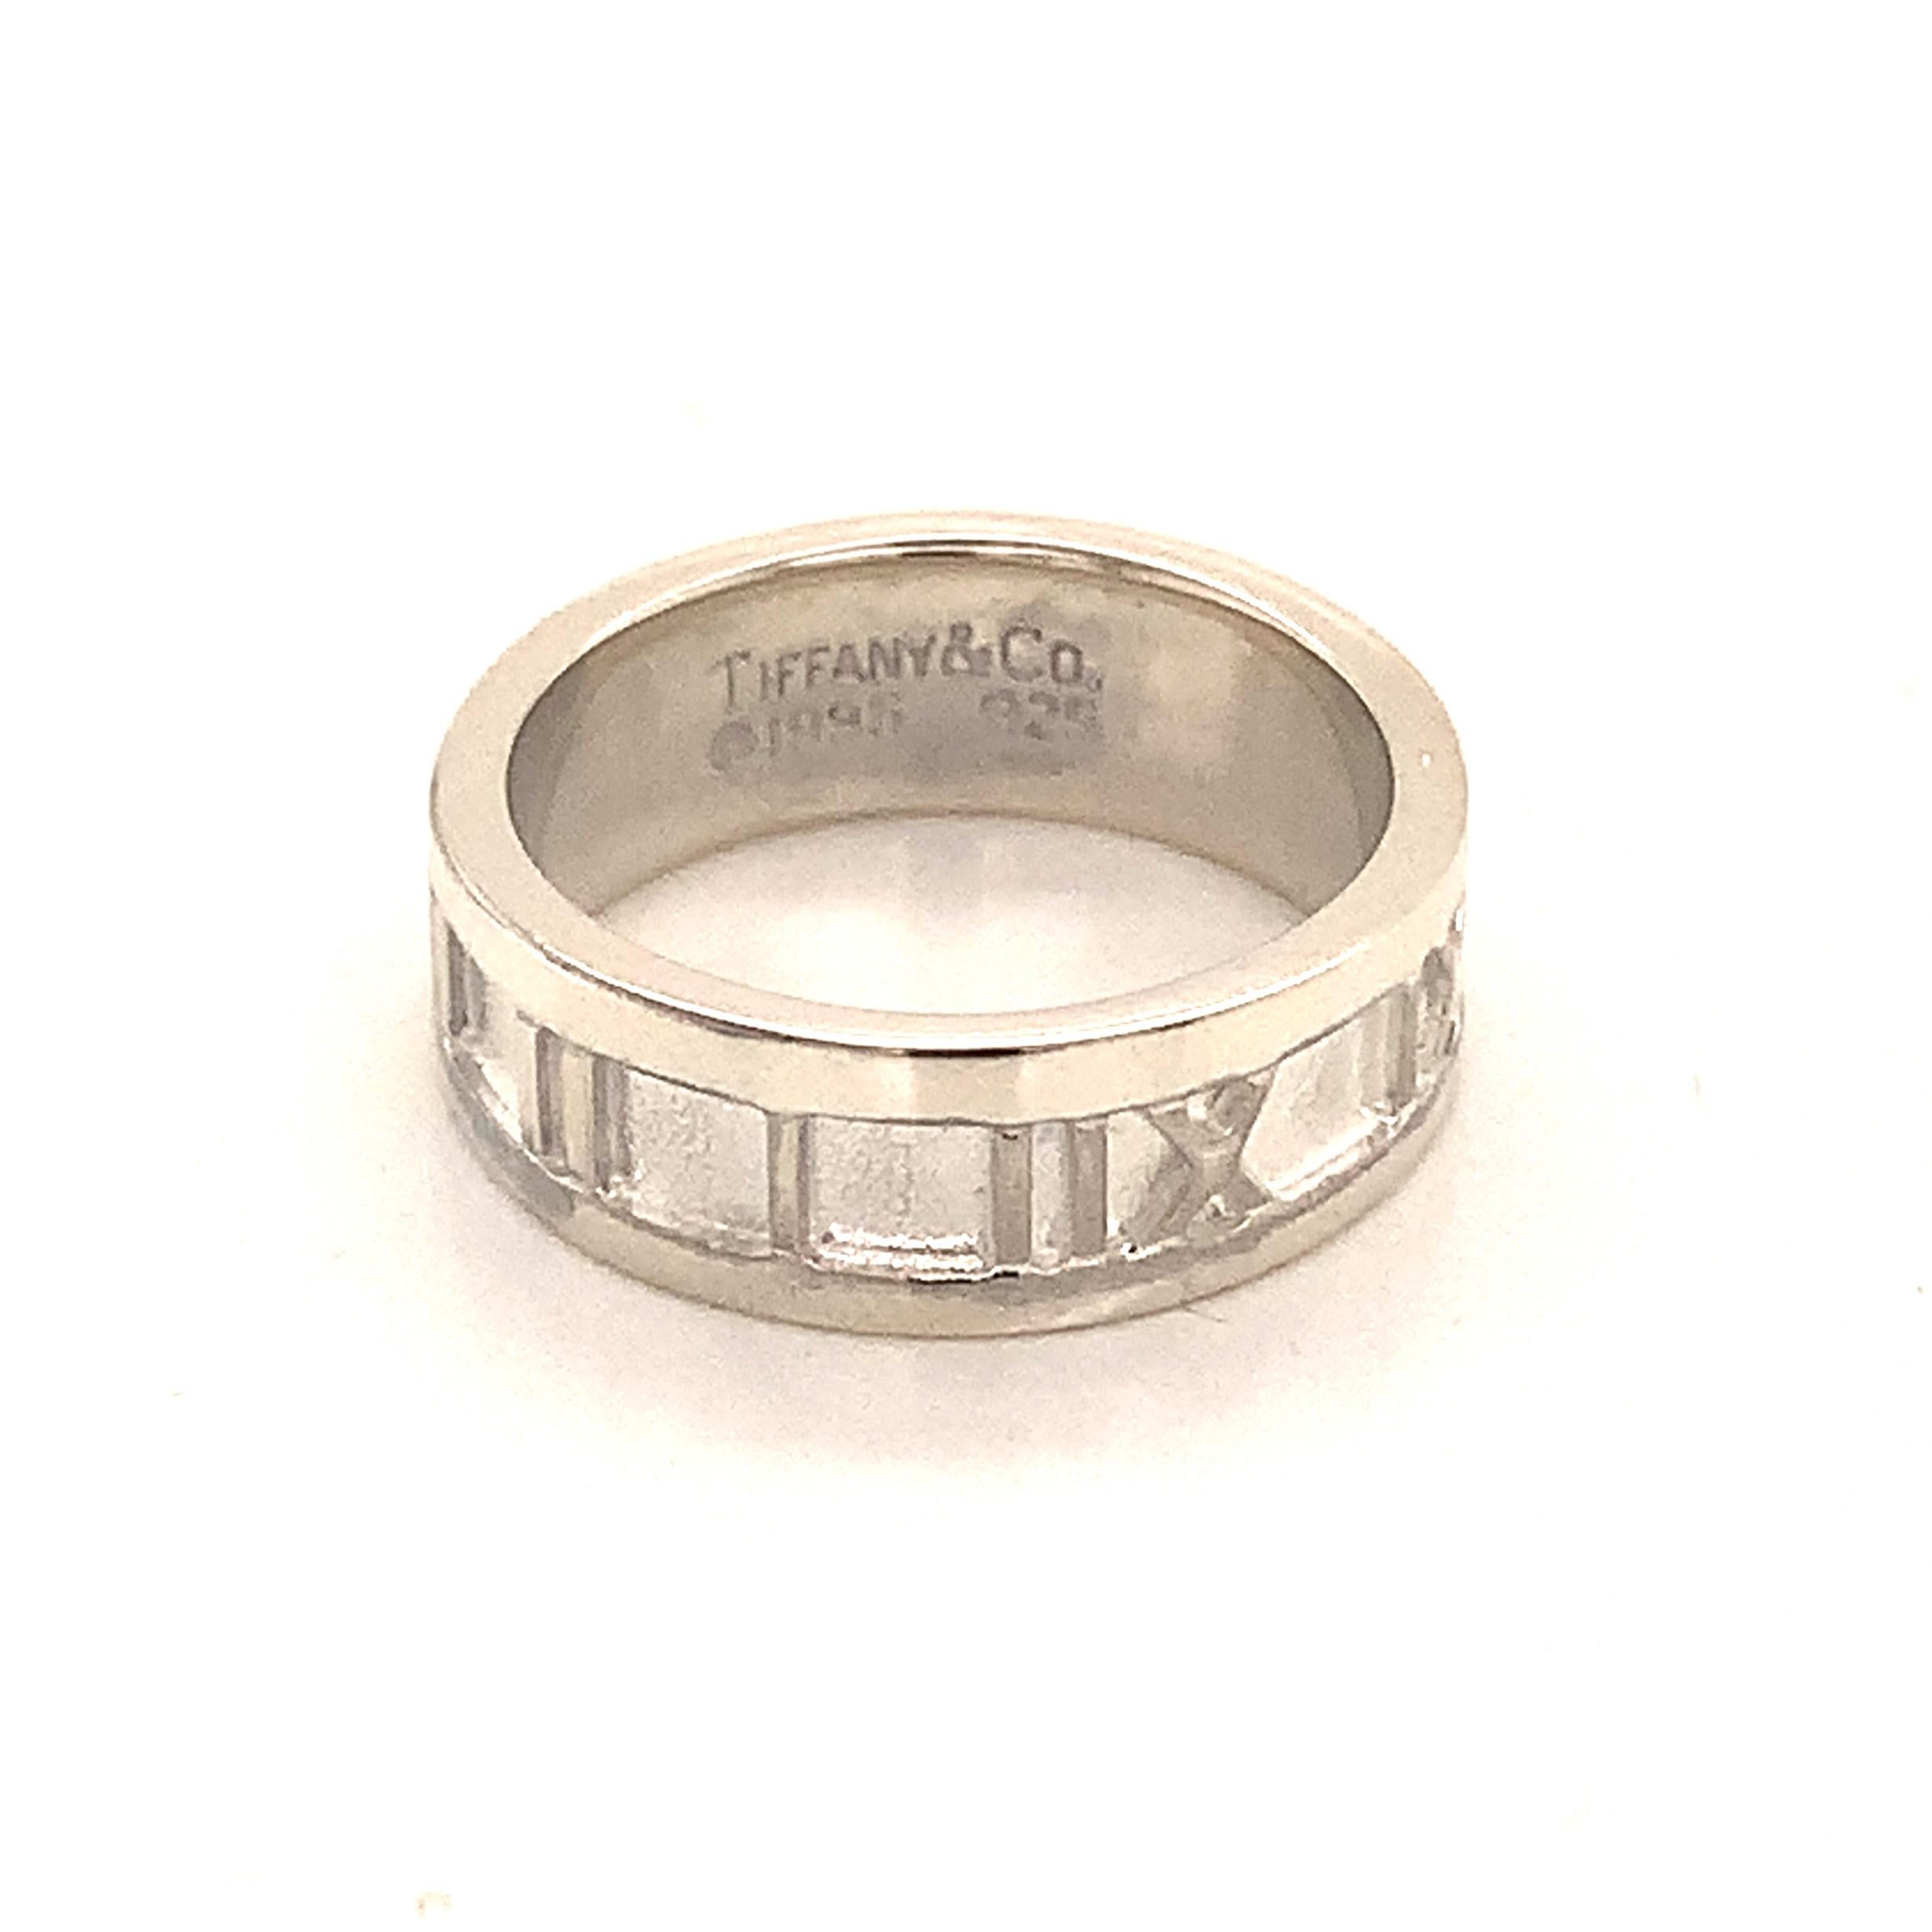 Tiffany & Co Ring Size 4.5 Sterling Silver 4.2 Grams TIF107
 
This elegant Authentic Tiffany & Co ring is made of sterling silver and has a weight of 4.2 grams.

TRUSTED SELLER SINCE 2002
 
PLEASE SEE OUR HUNDREDS OF POSITIVE FEEDBACKS FROM OUR